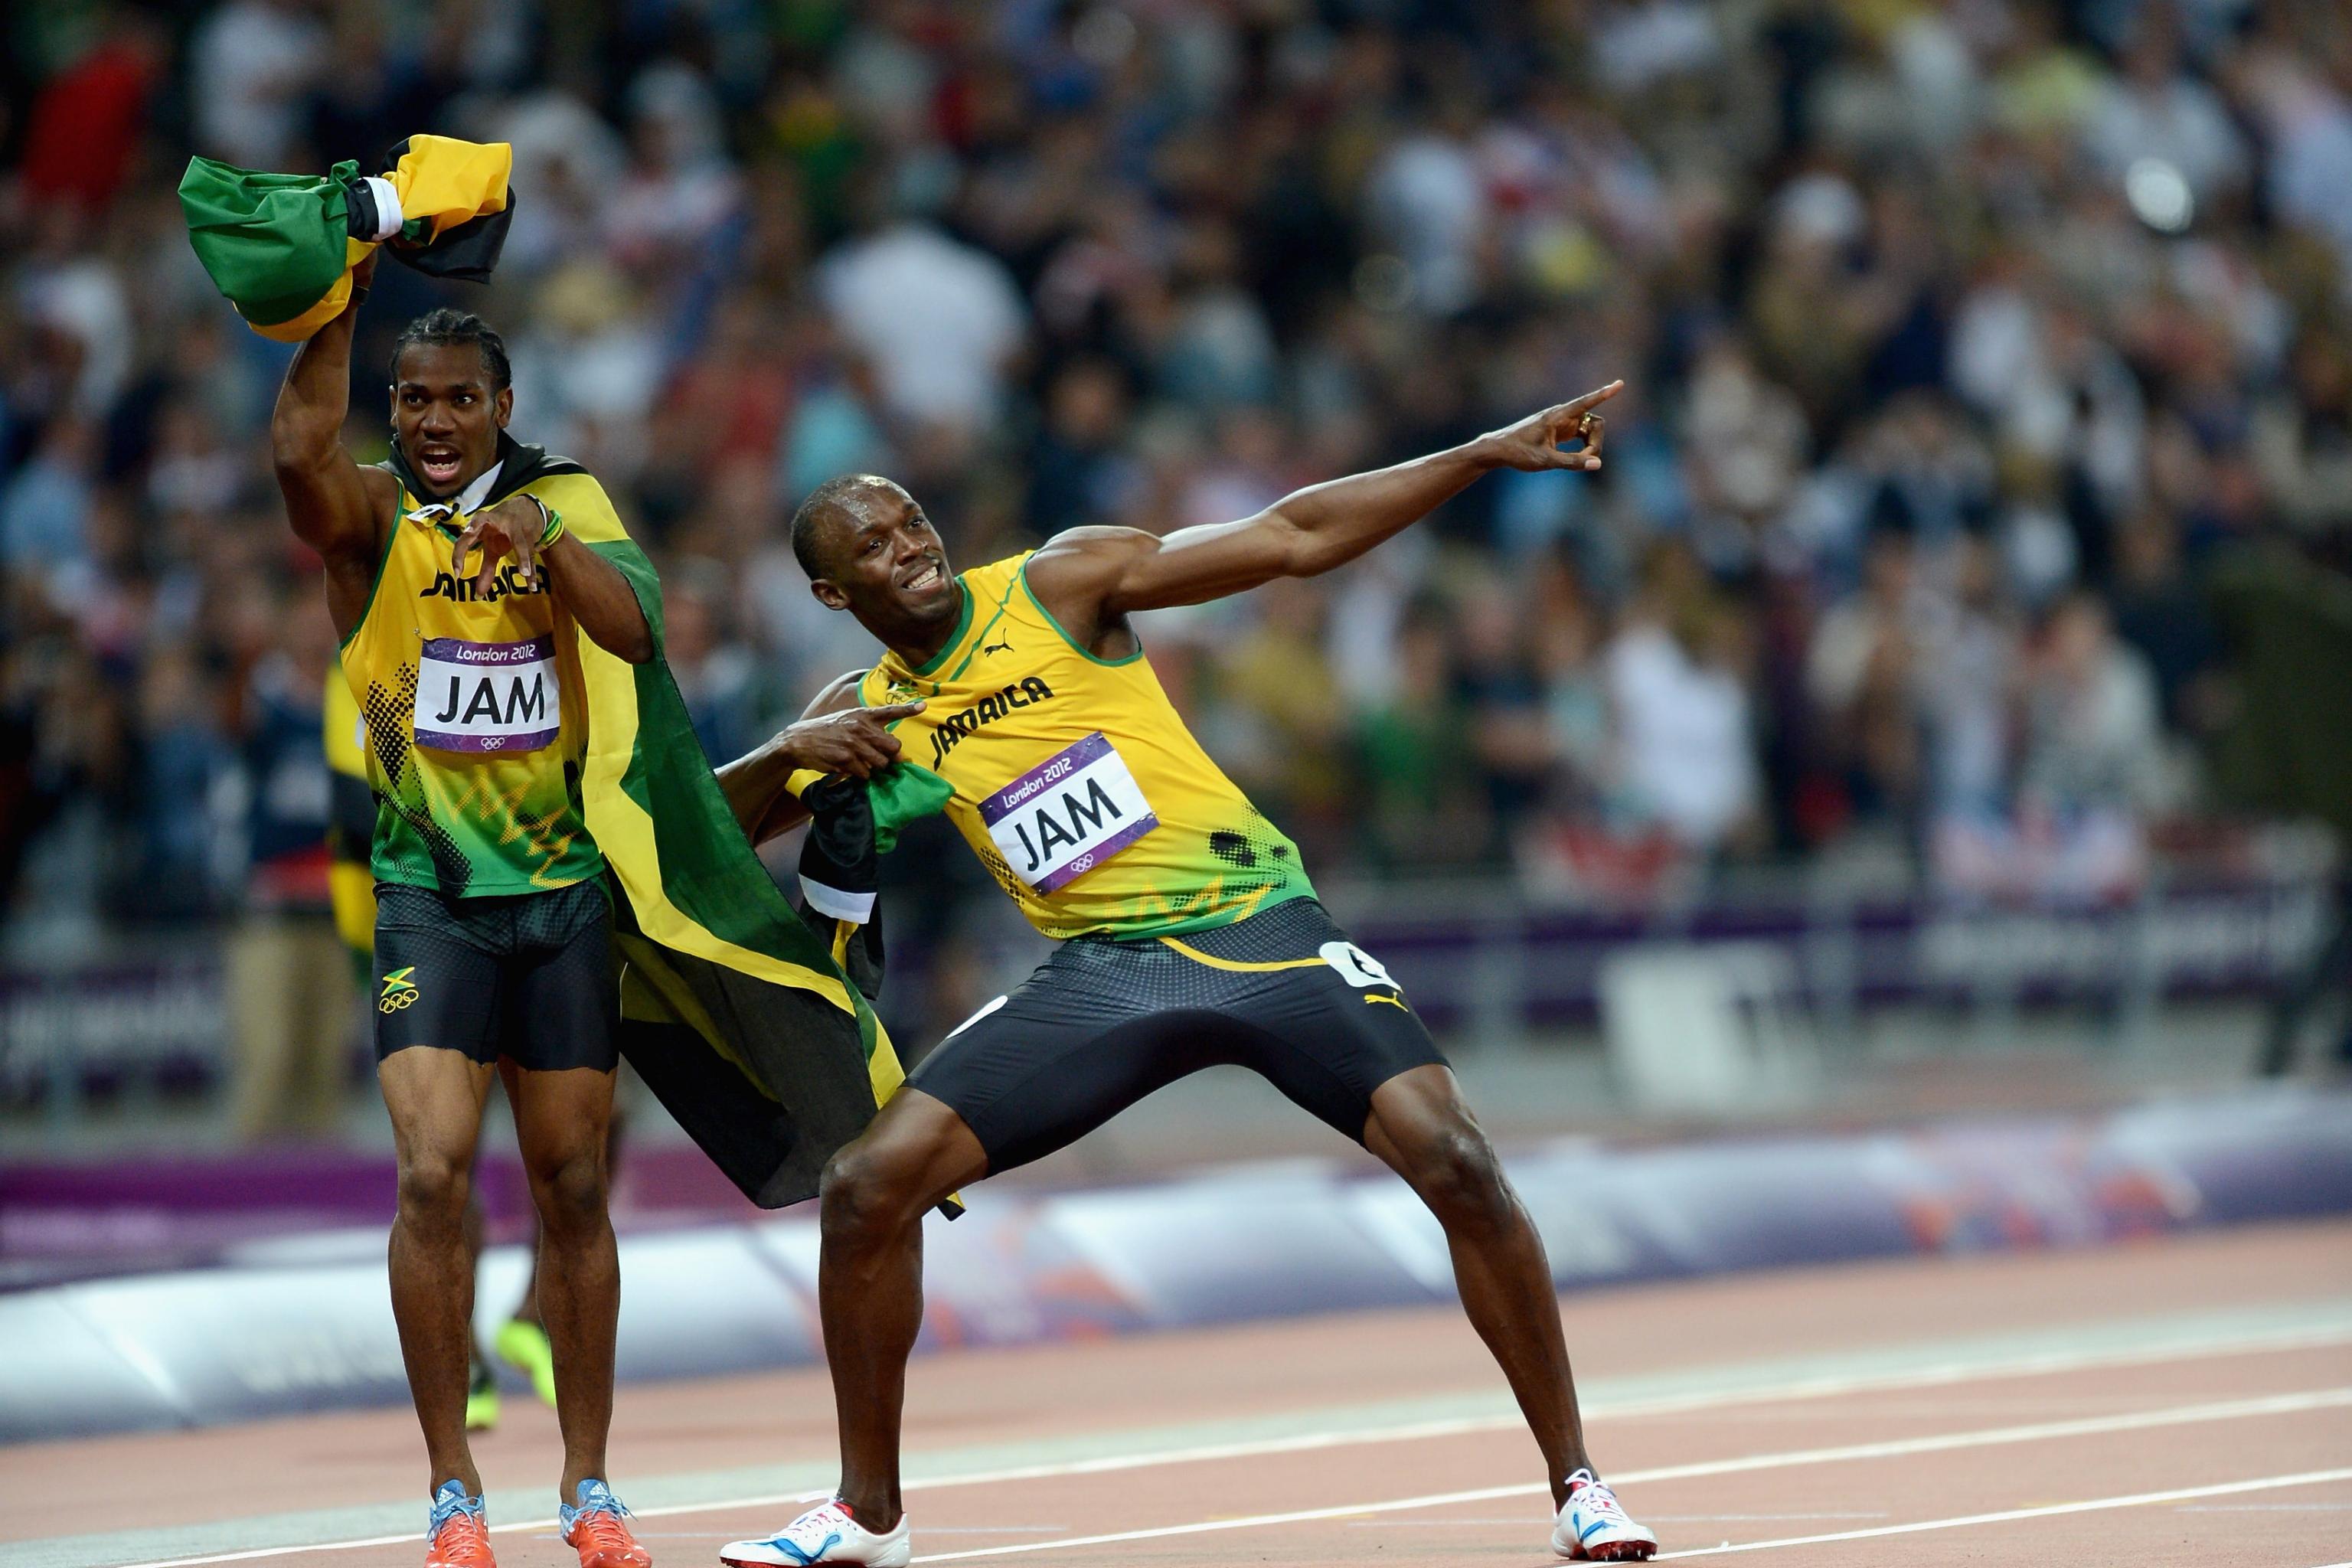 Olympic 100Meter Champ Usain Bolt The Most Dominant Sprinter in History?